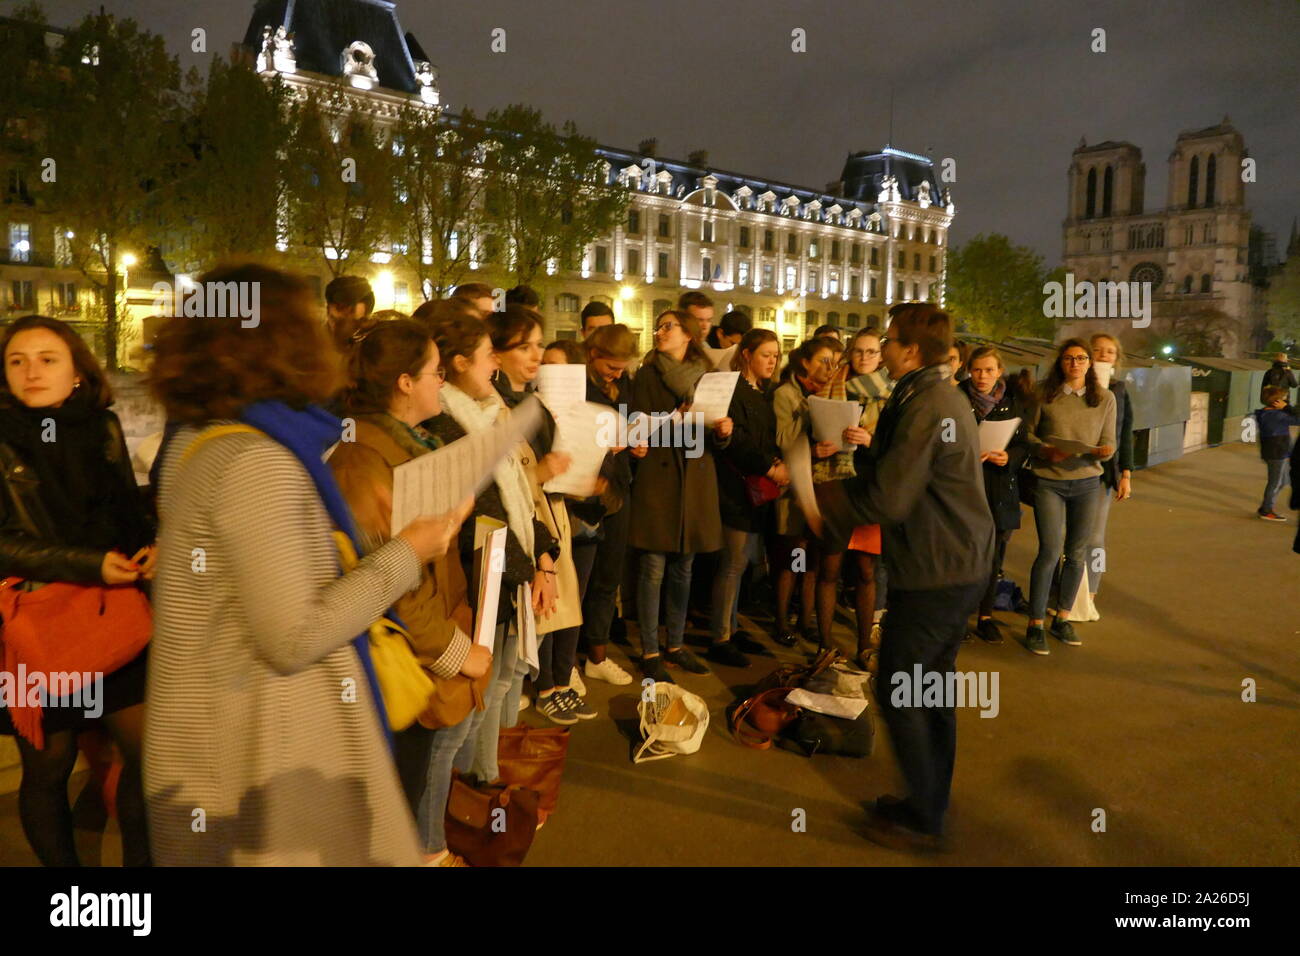 A spontaneous street choir sings Catholic liturgical songs to offer supplication and comfort near the now unlit Cathedral. Stock Photo